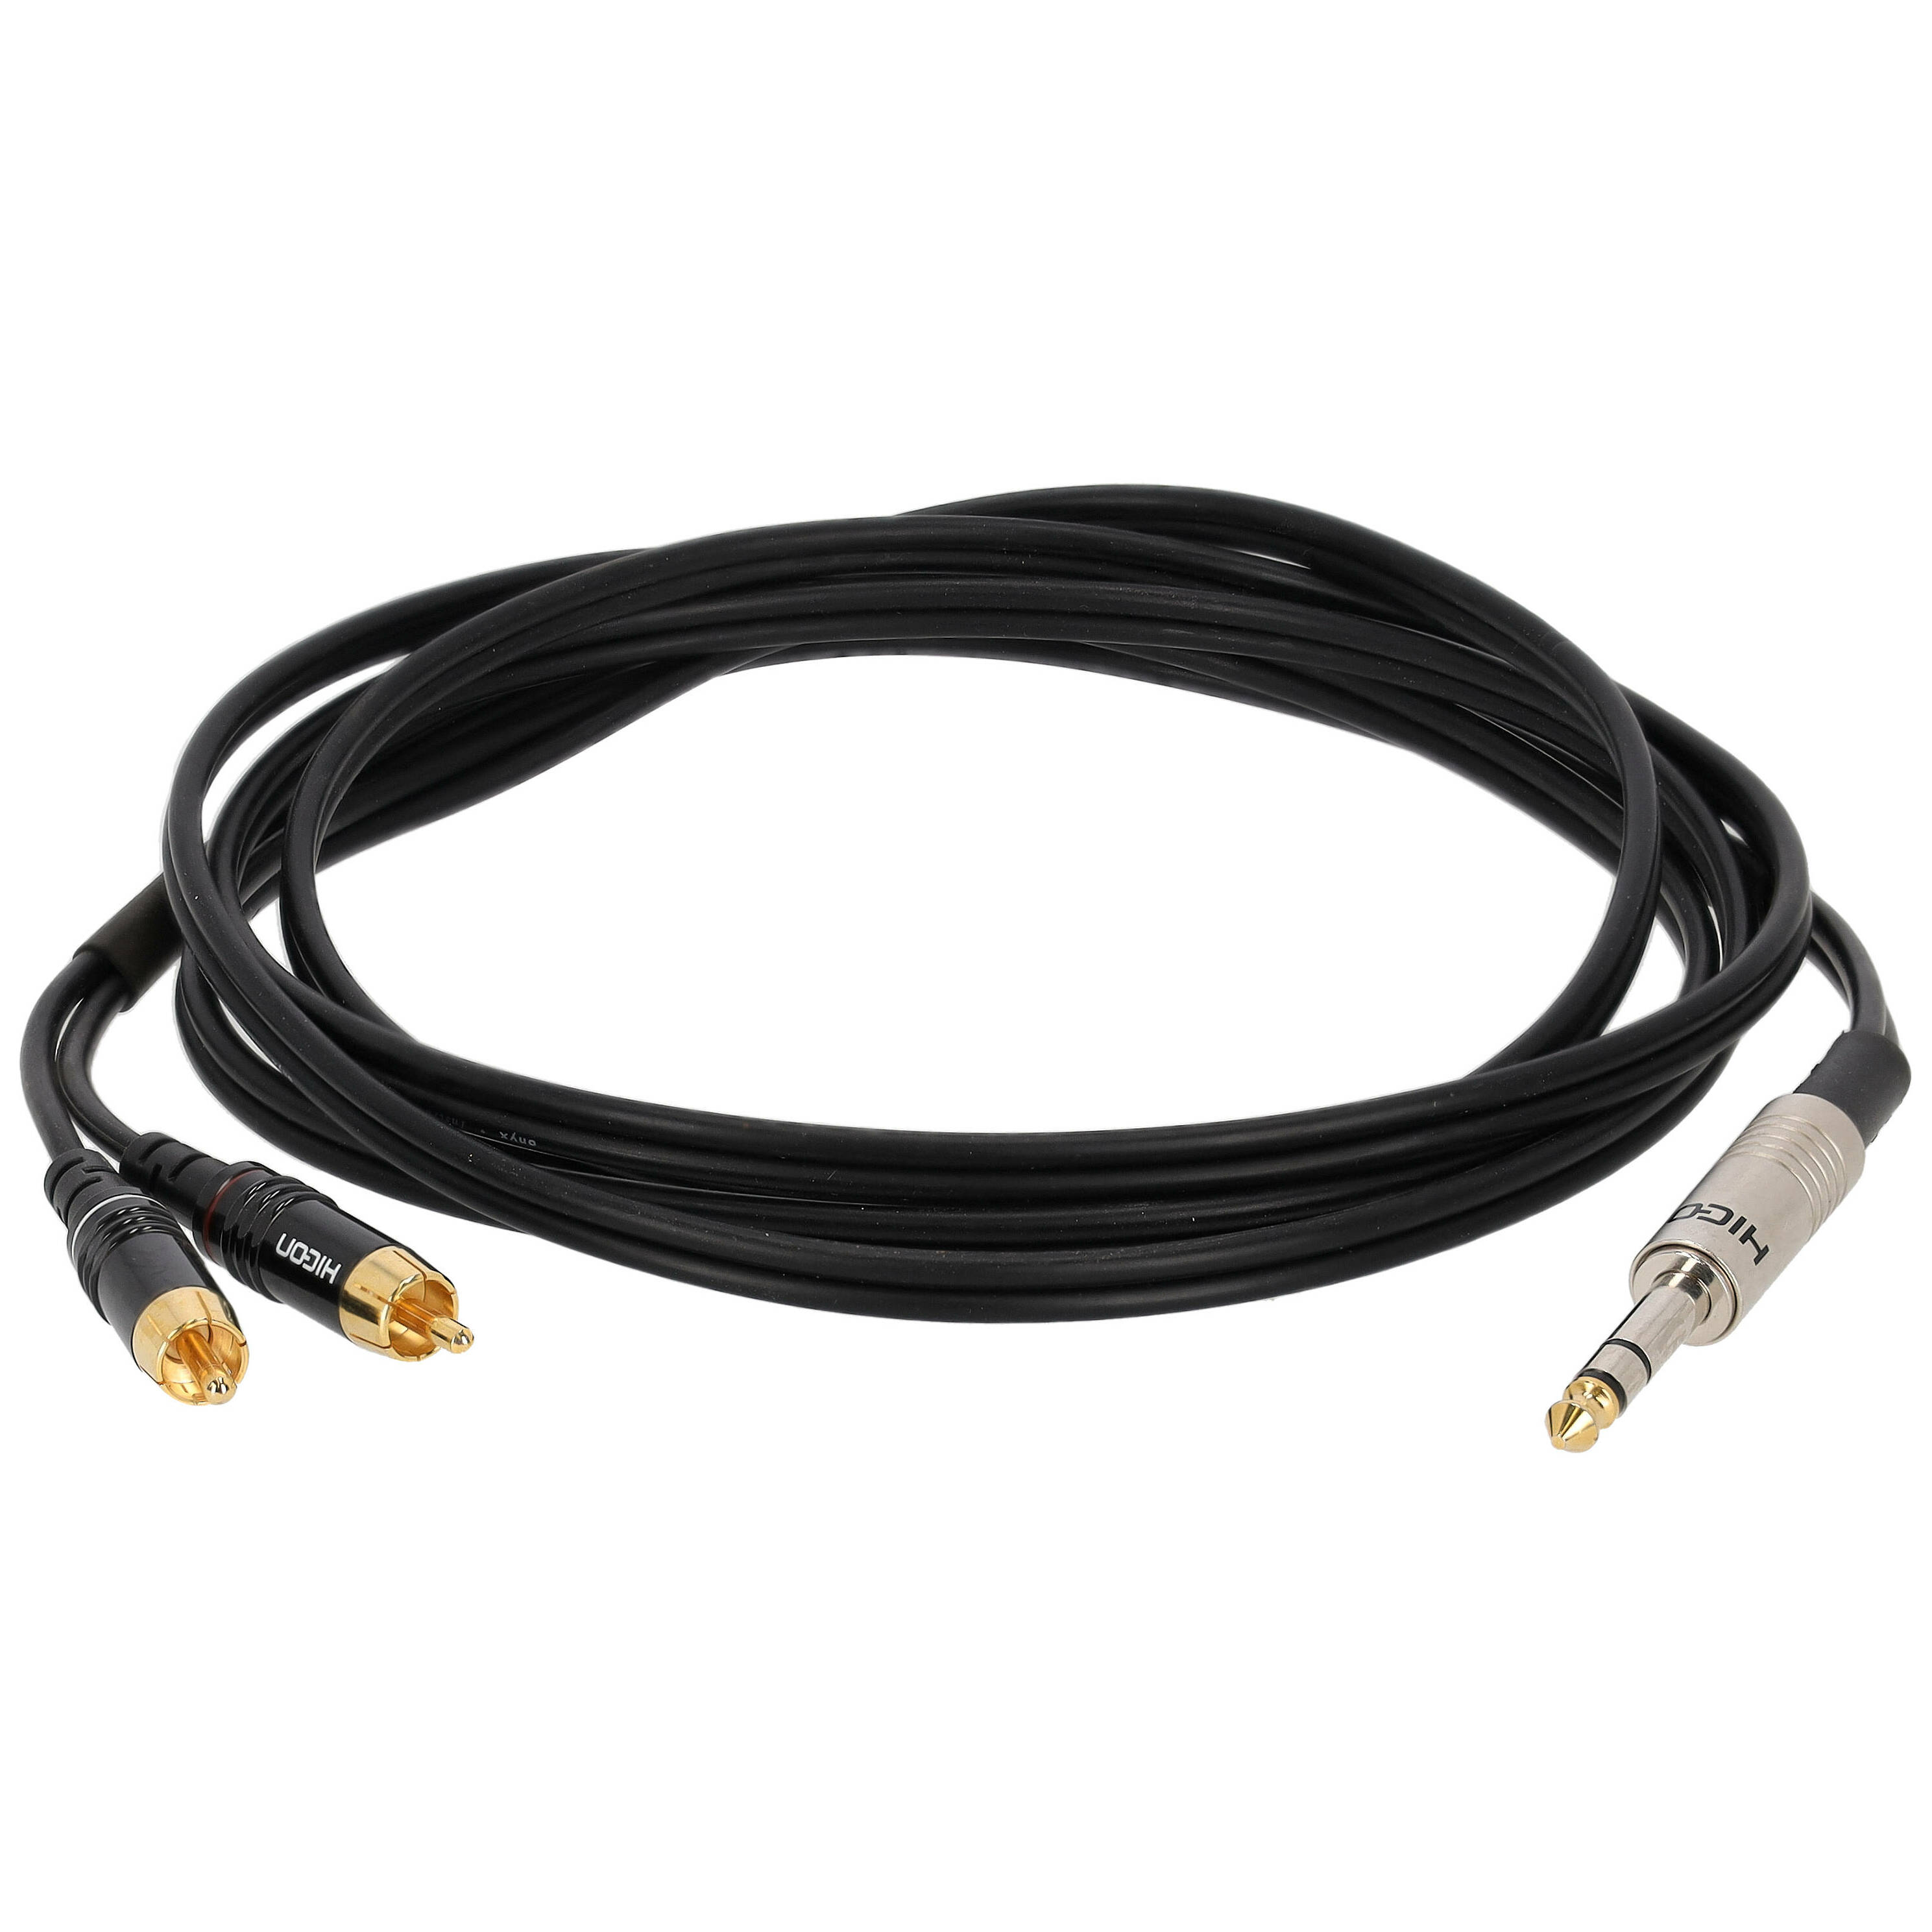 Sommer Cable ON56-0250-SW SC-Onyx Klinke Stereo Male - 2 x Cinch Male 2,5 Meter 1